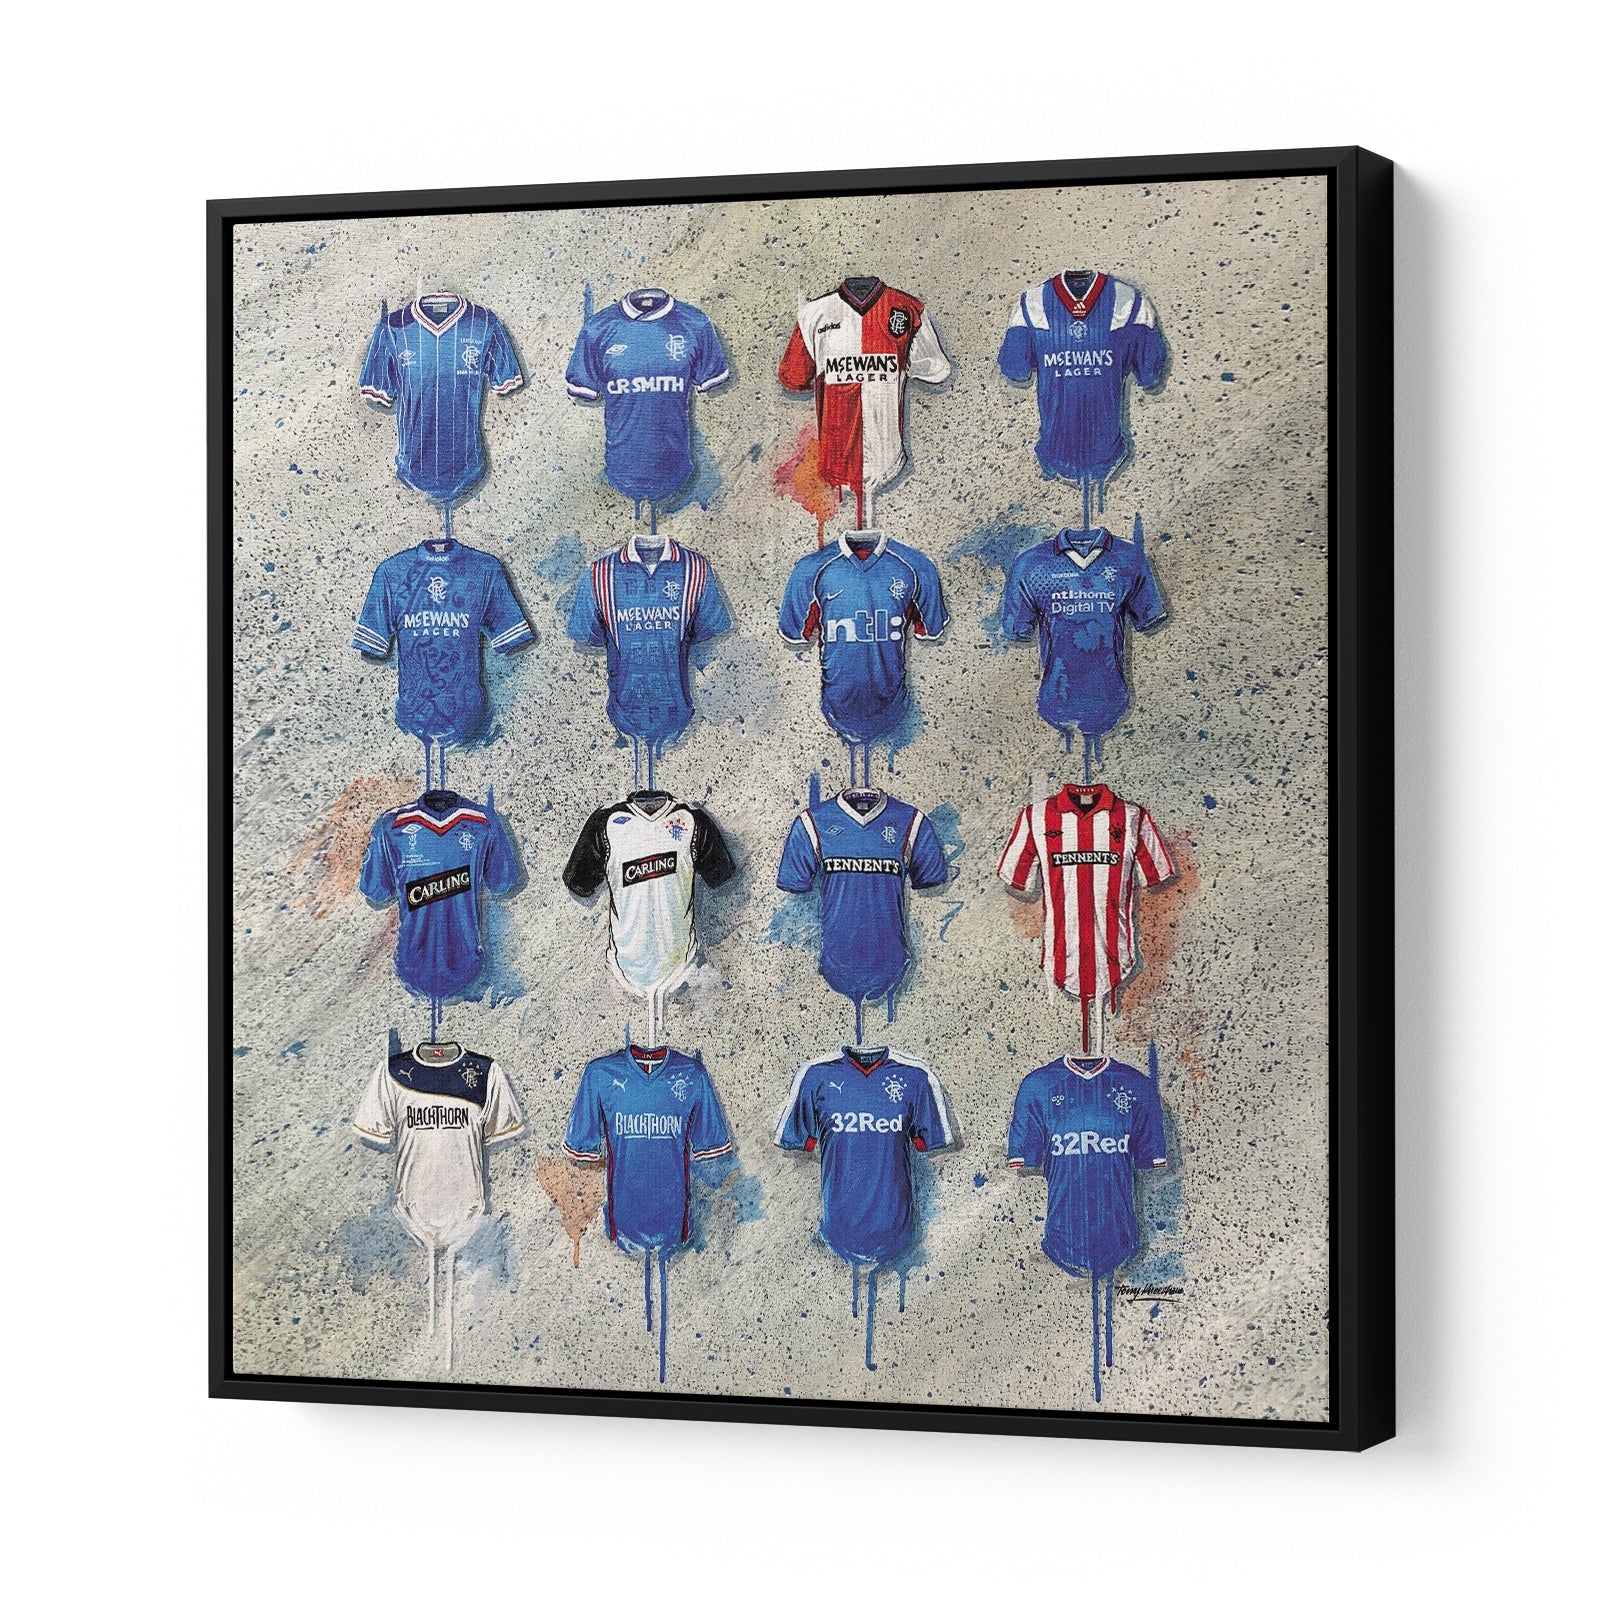 These Rangers canvases from Terry Kneeshaw are perfect for any Rangers fan. The collection features various sizes of artwork, including 20x20, 30x30, and 40x40 canvases, which can be framed or unframed with black floating frames. The artwork includes stunning images of the Rangers team, crest, and symbols. These canvases are sure to make a great addition to any Rangers fan's collection or as a gift for a friend or loved one who supports the team.